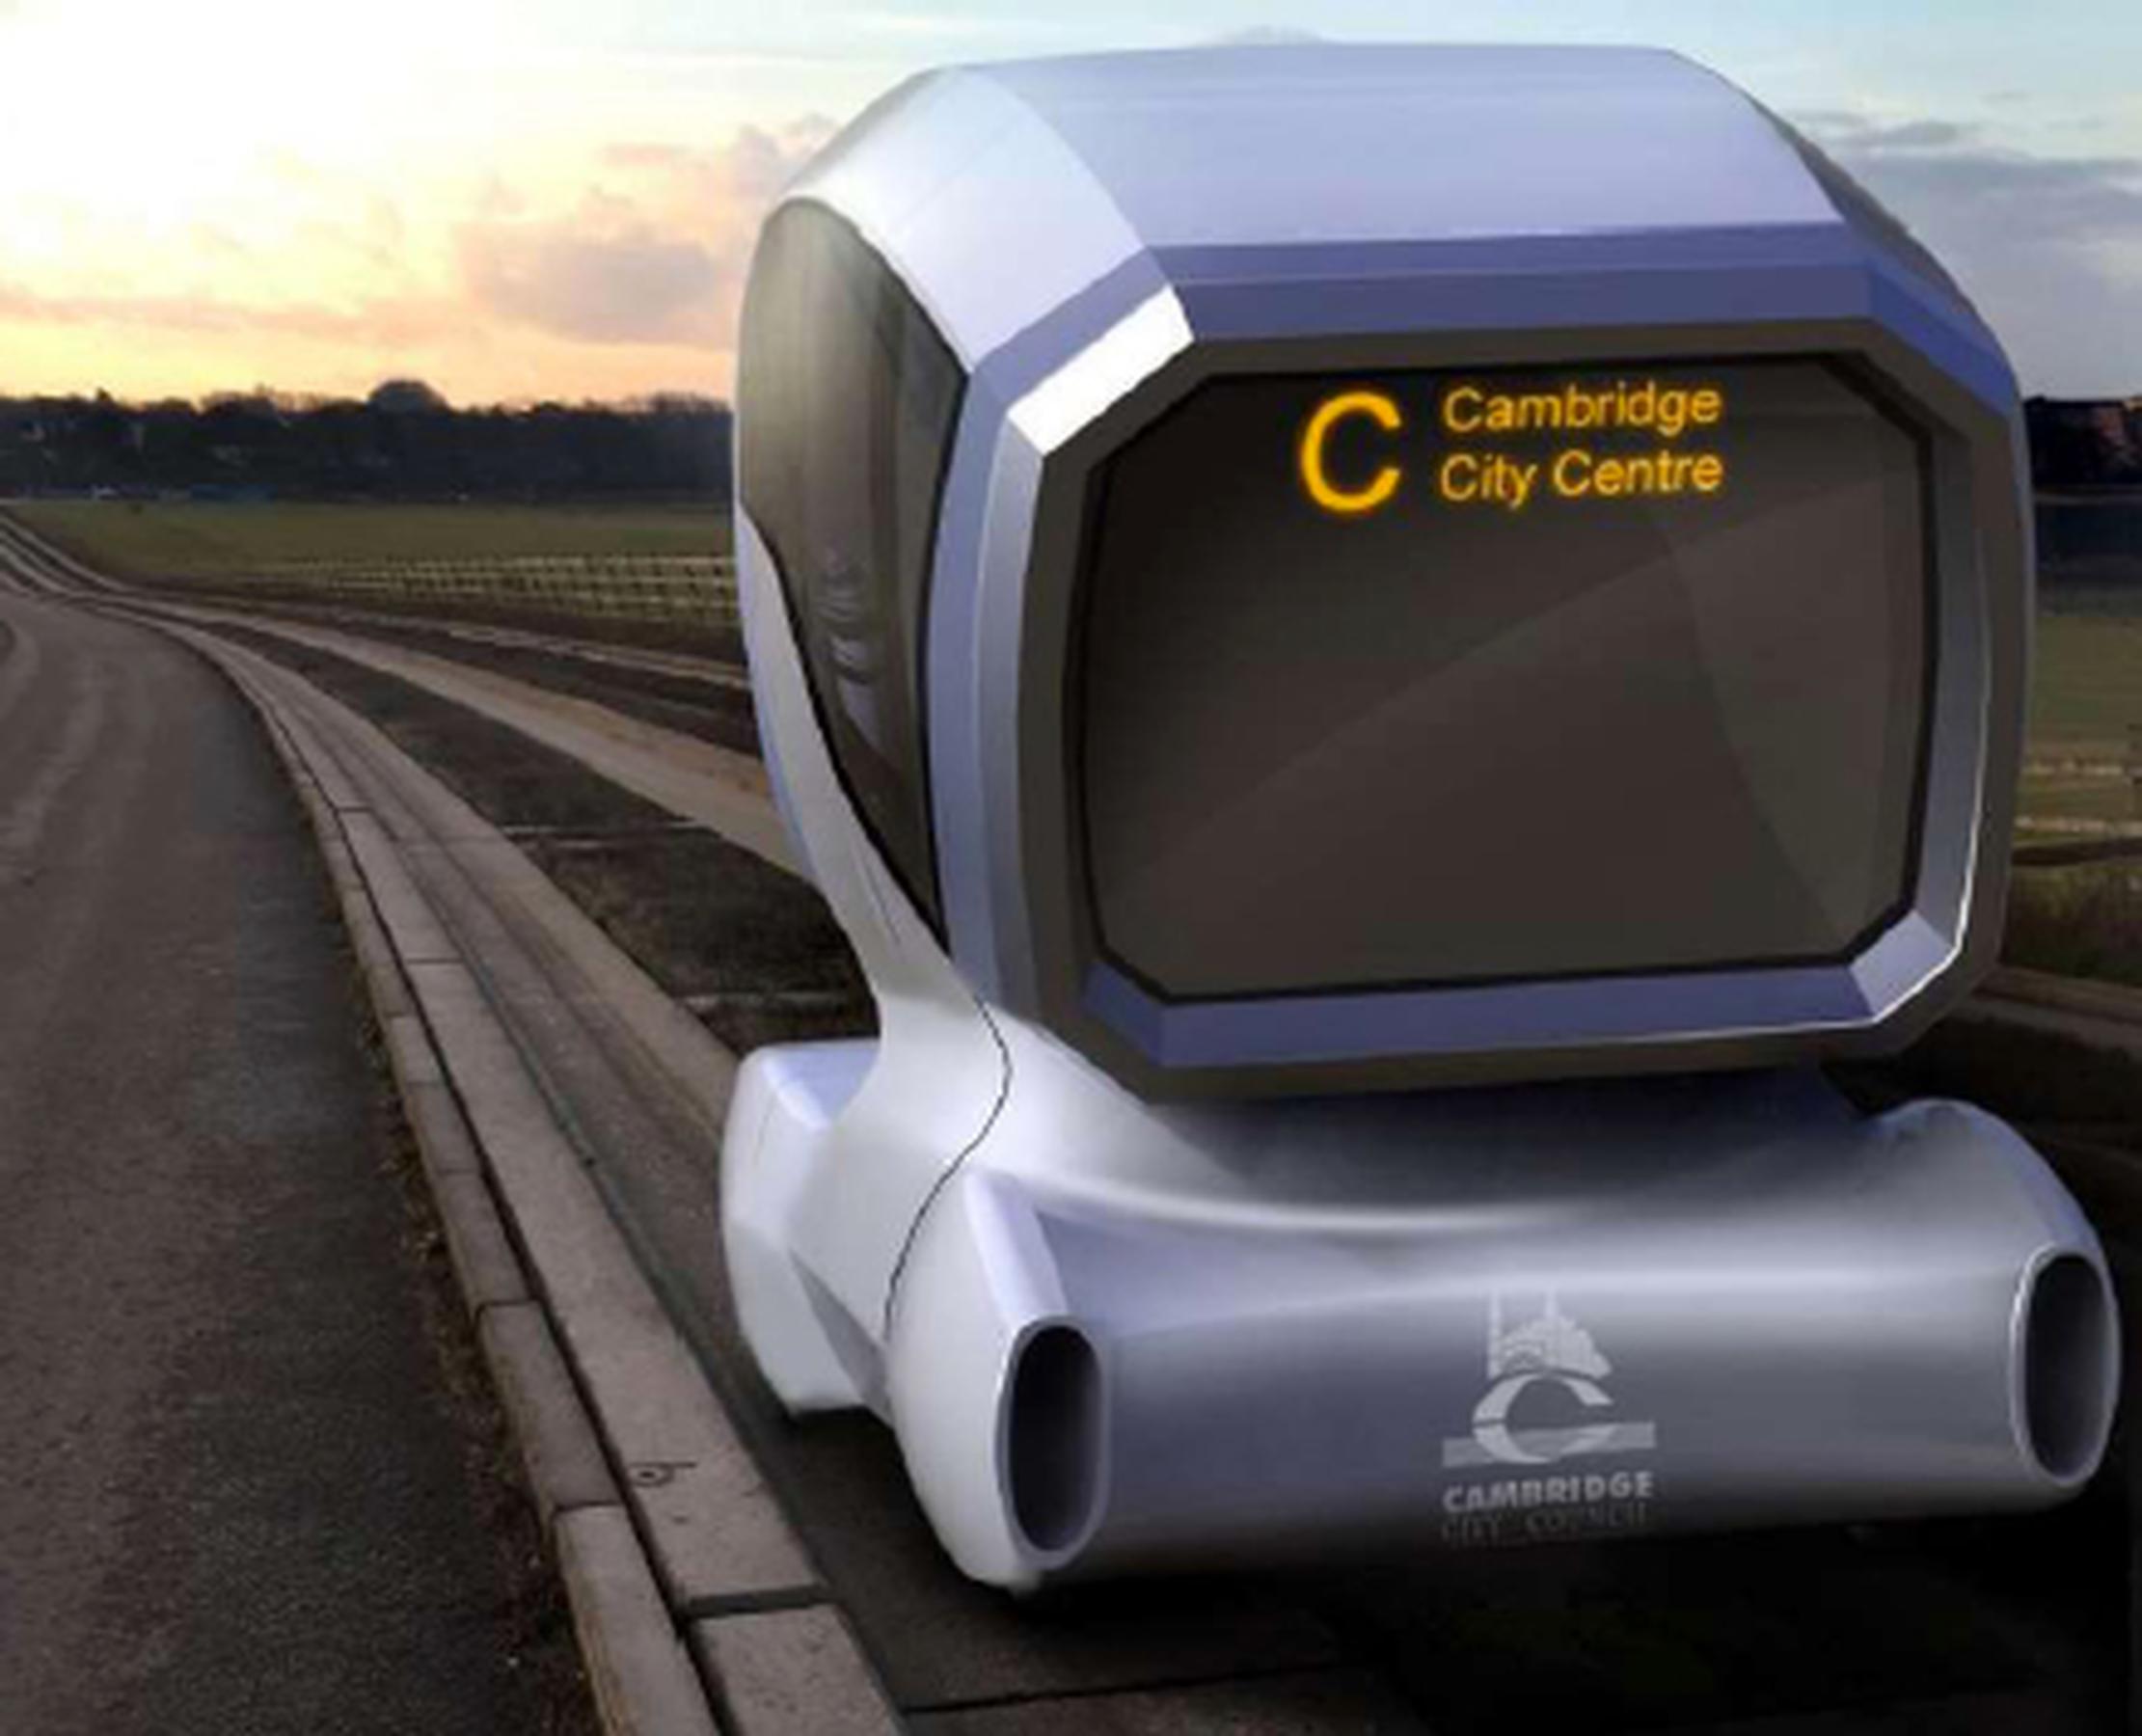 Automated pods could use the guided busway to connect employment areas with transport interchanges